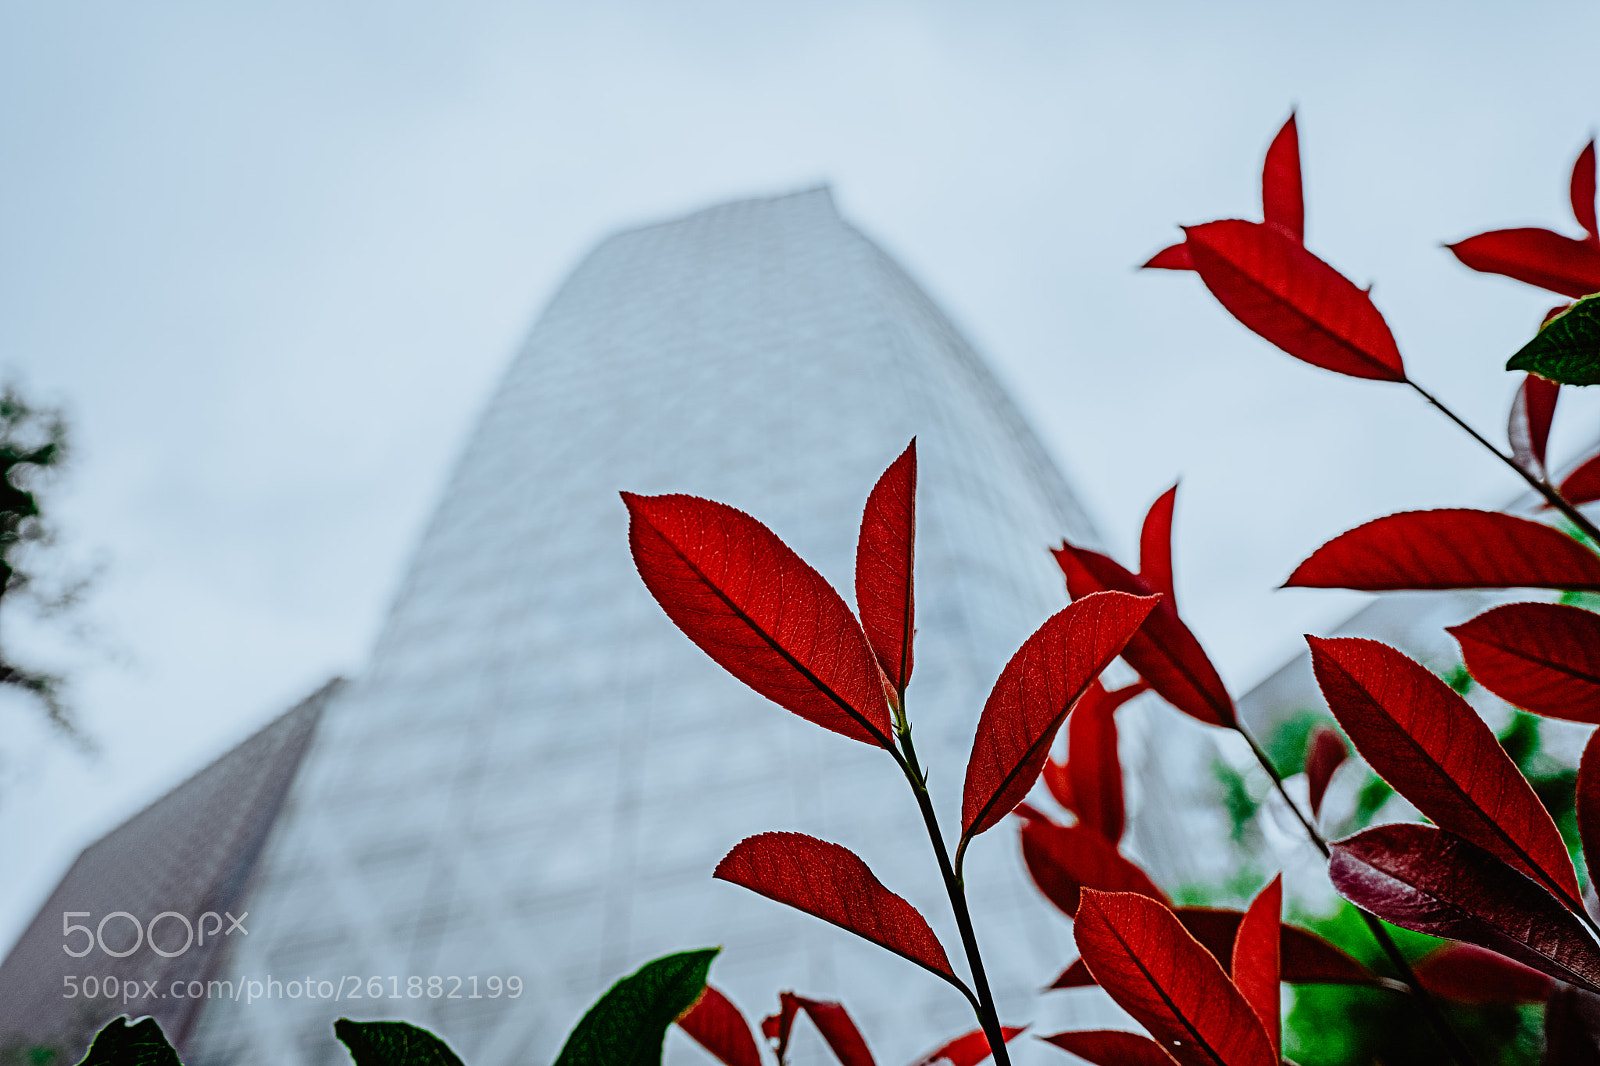 Sony a7 III sample photo. Red leaves with skyscraper photography